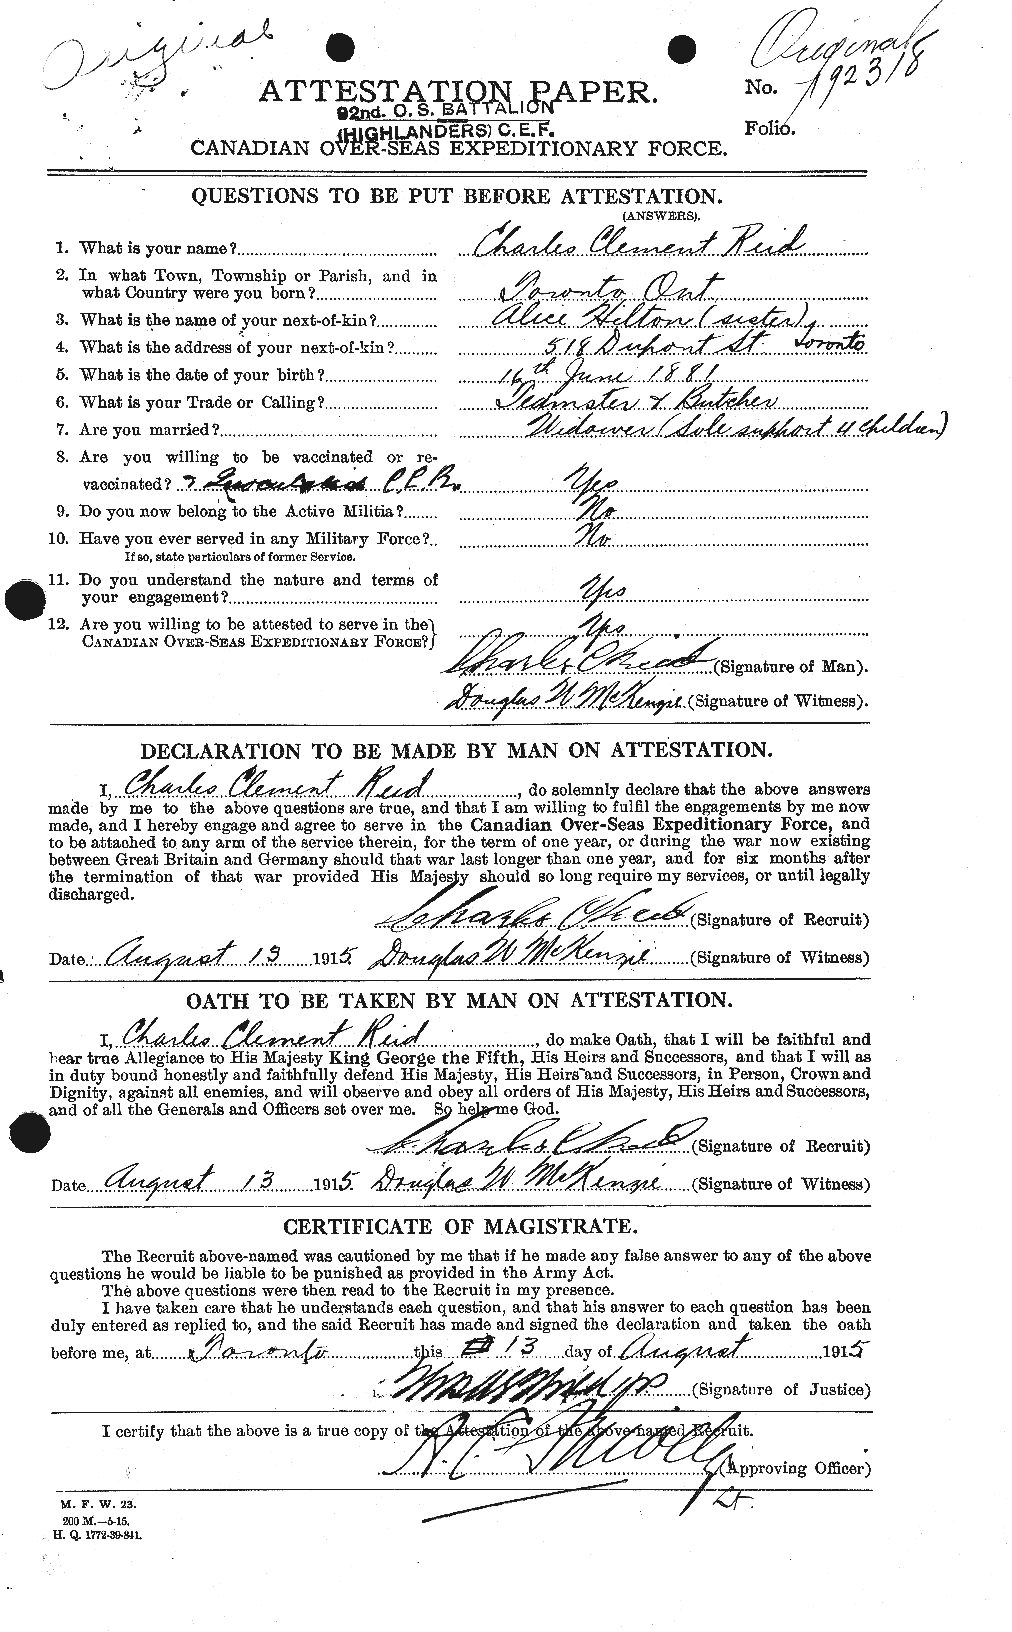 Personnel Records of the First World War - CEF 597885a